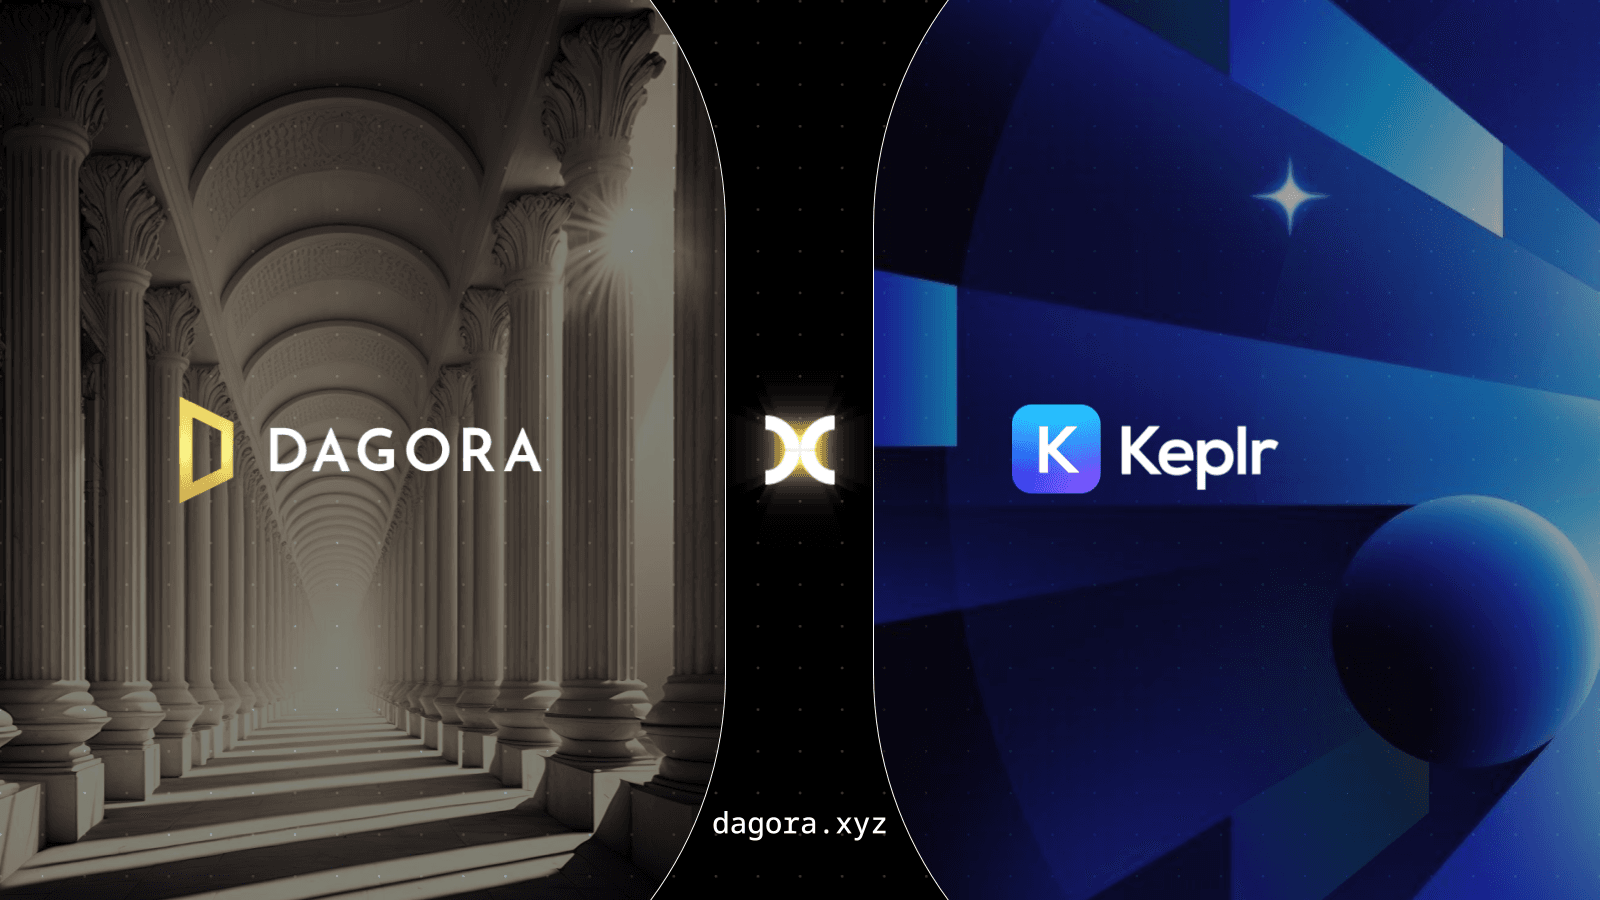 Dagora integrates Keplr, enhancing the experience of the Injective NFT Marketplace with seamlessness